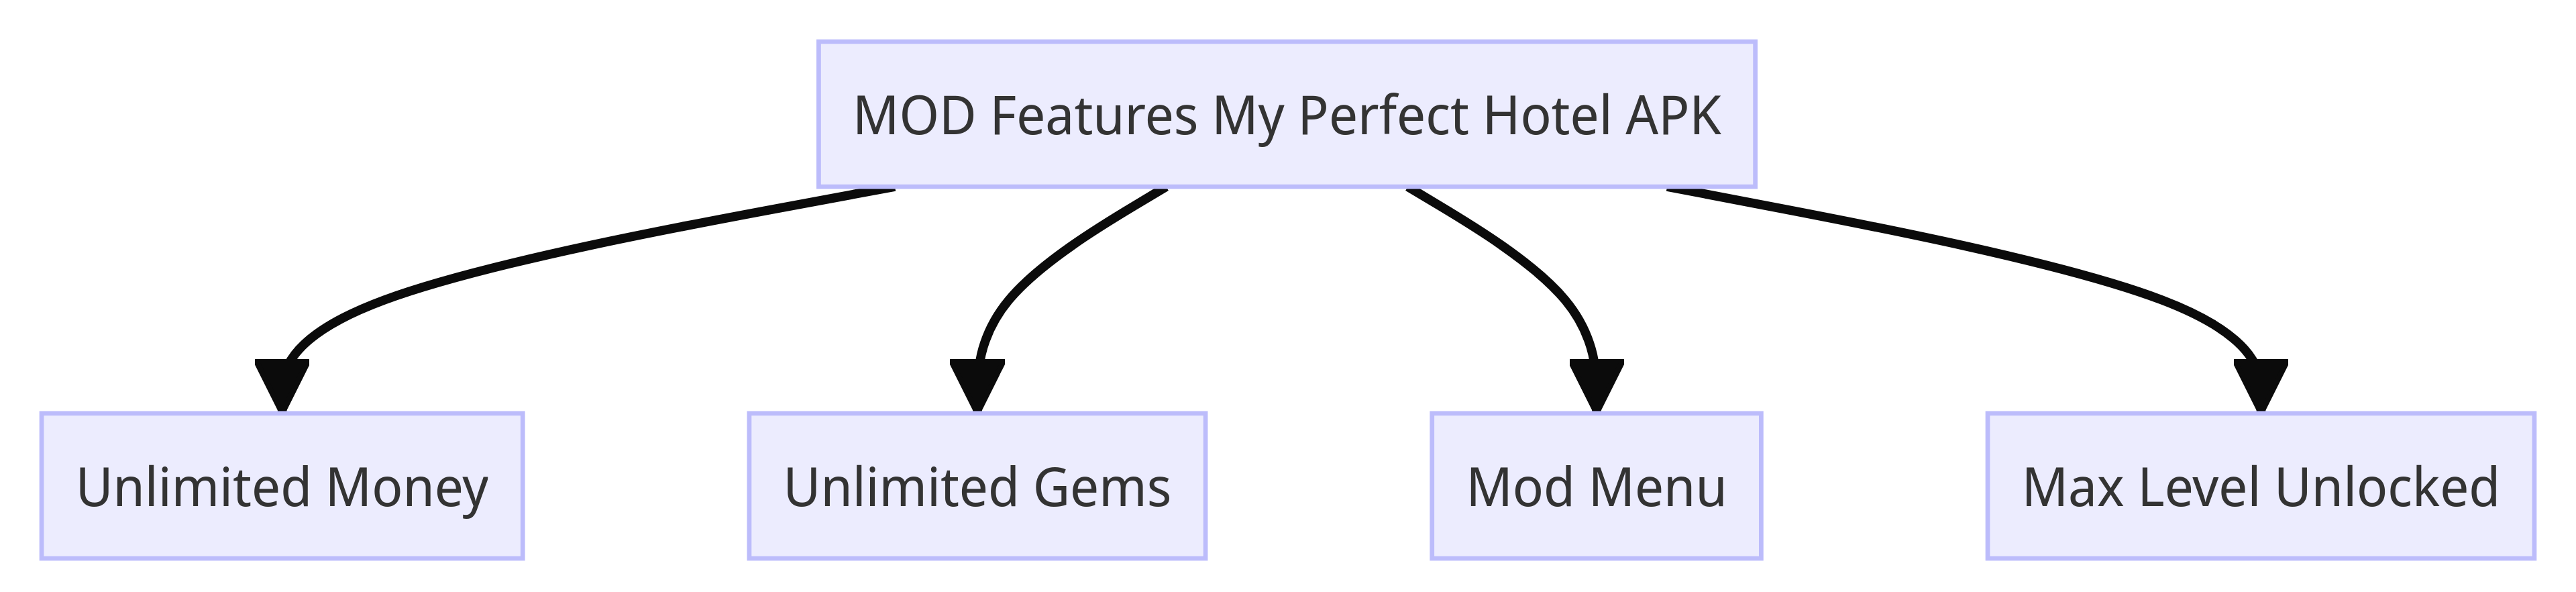 MOD Features My Perfect Hotel APK